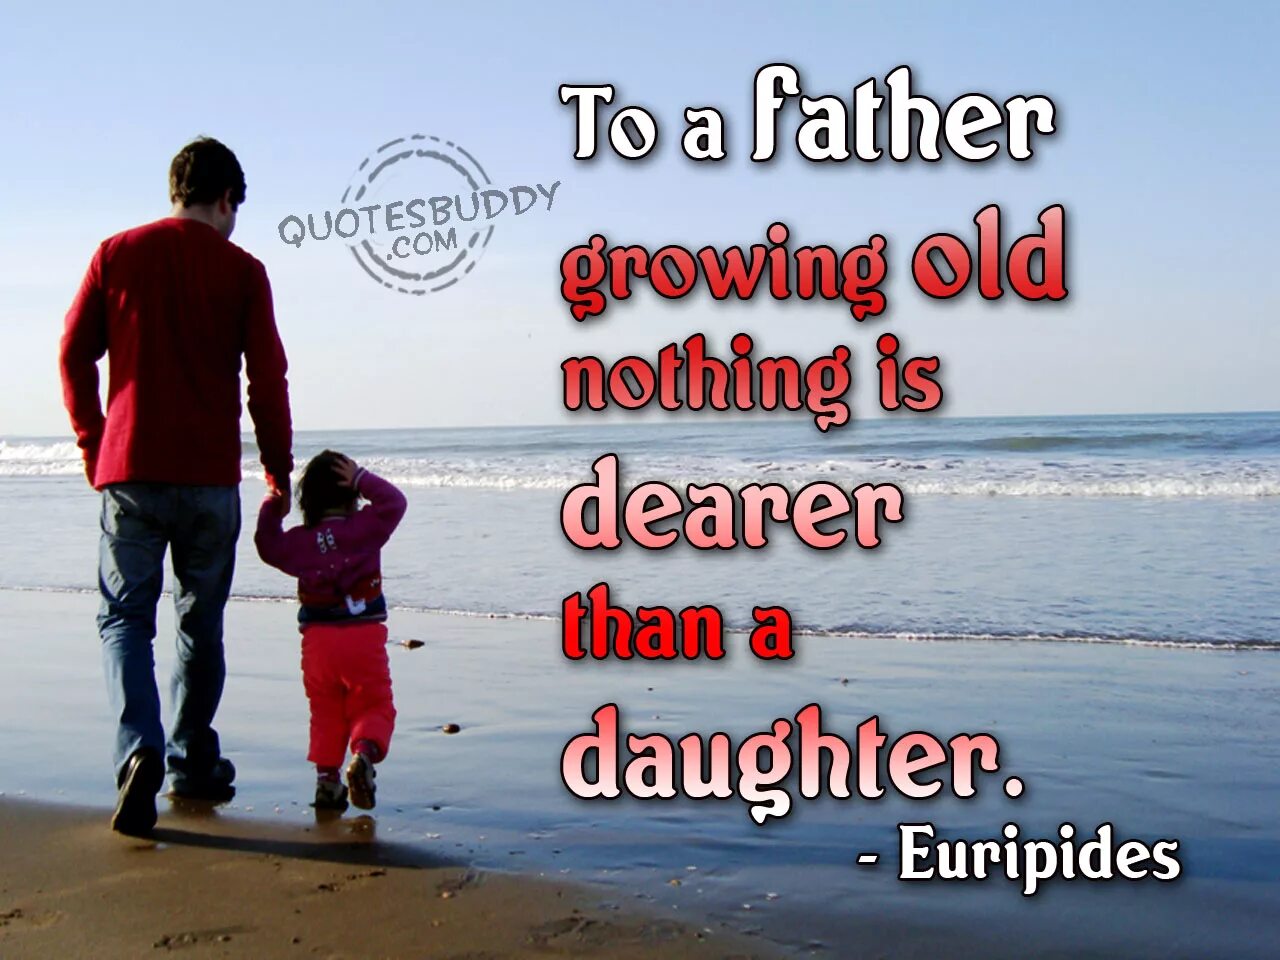 Loves his daughter. About fathers. Quotes about father. Father and son quotes. Fathers and daughter Love quotes.